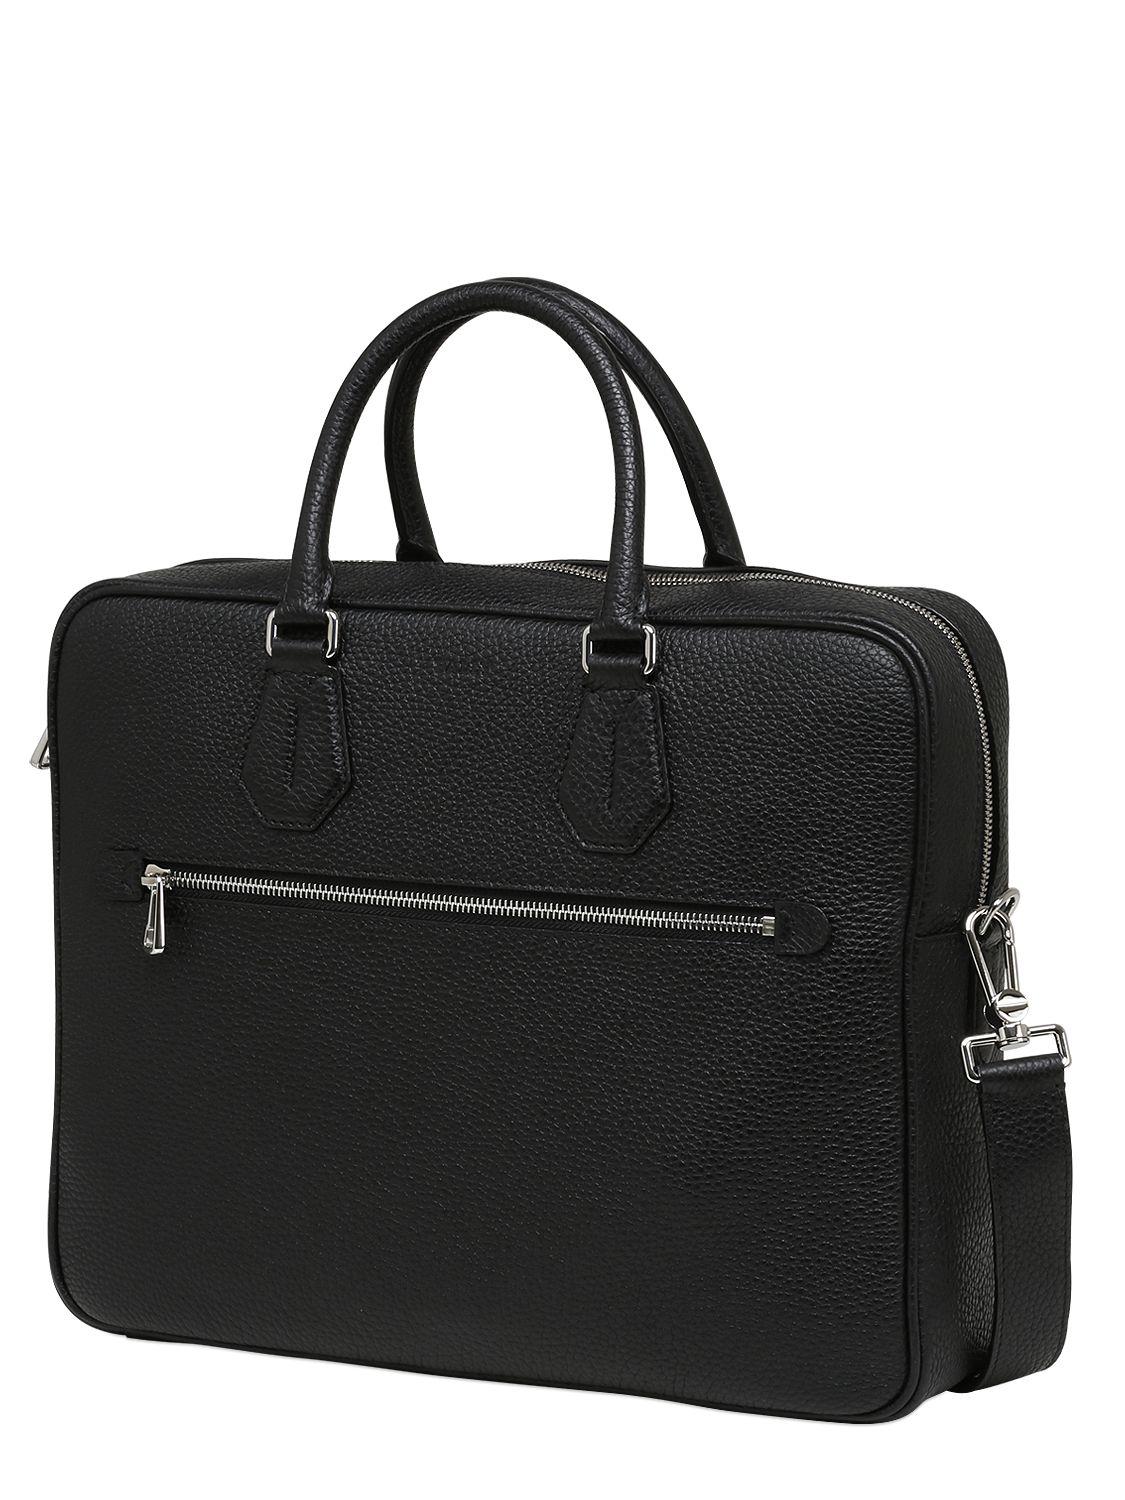 Bally Pebbled Leather Briefcase in Black for Men - Lyst